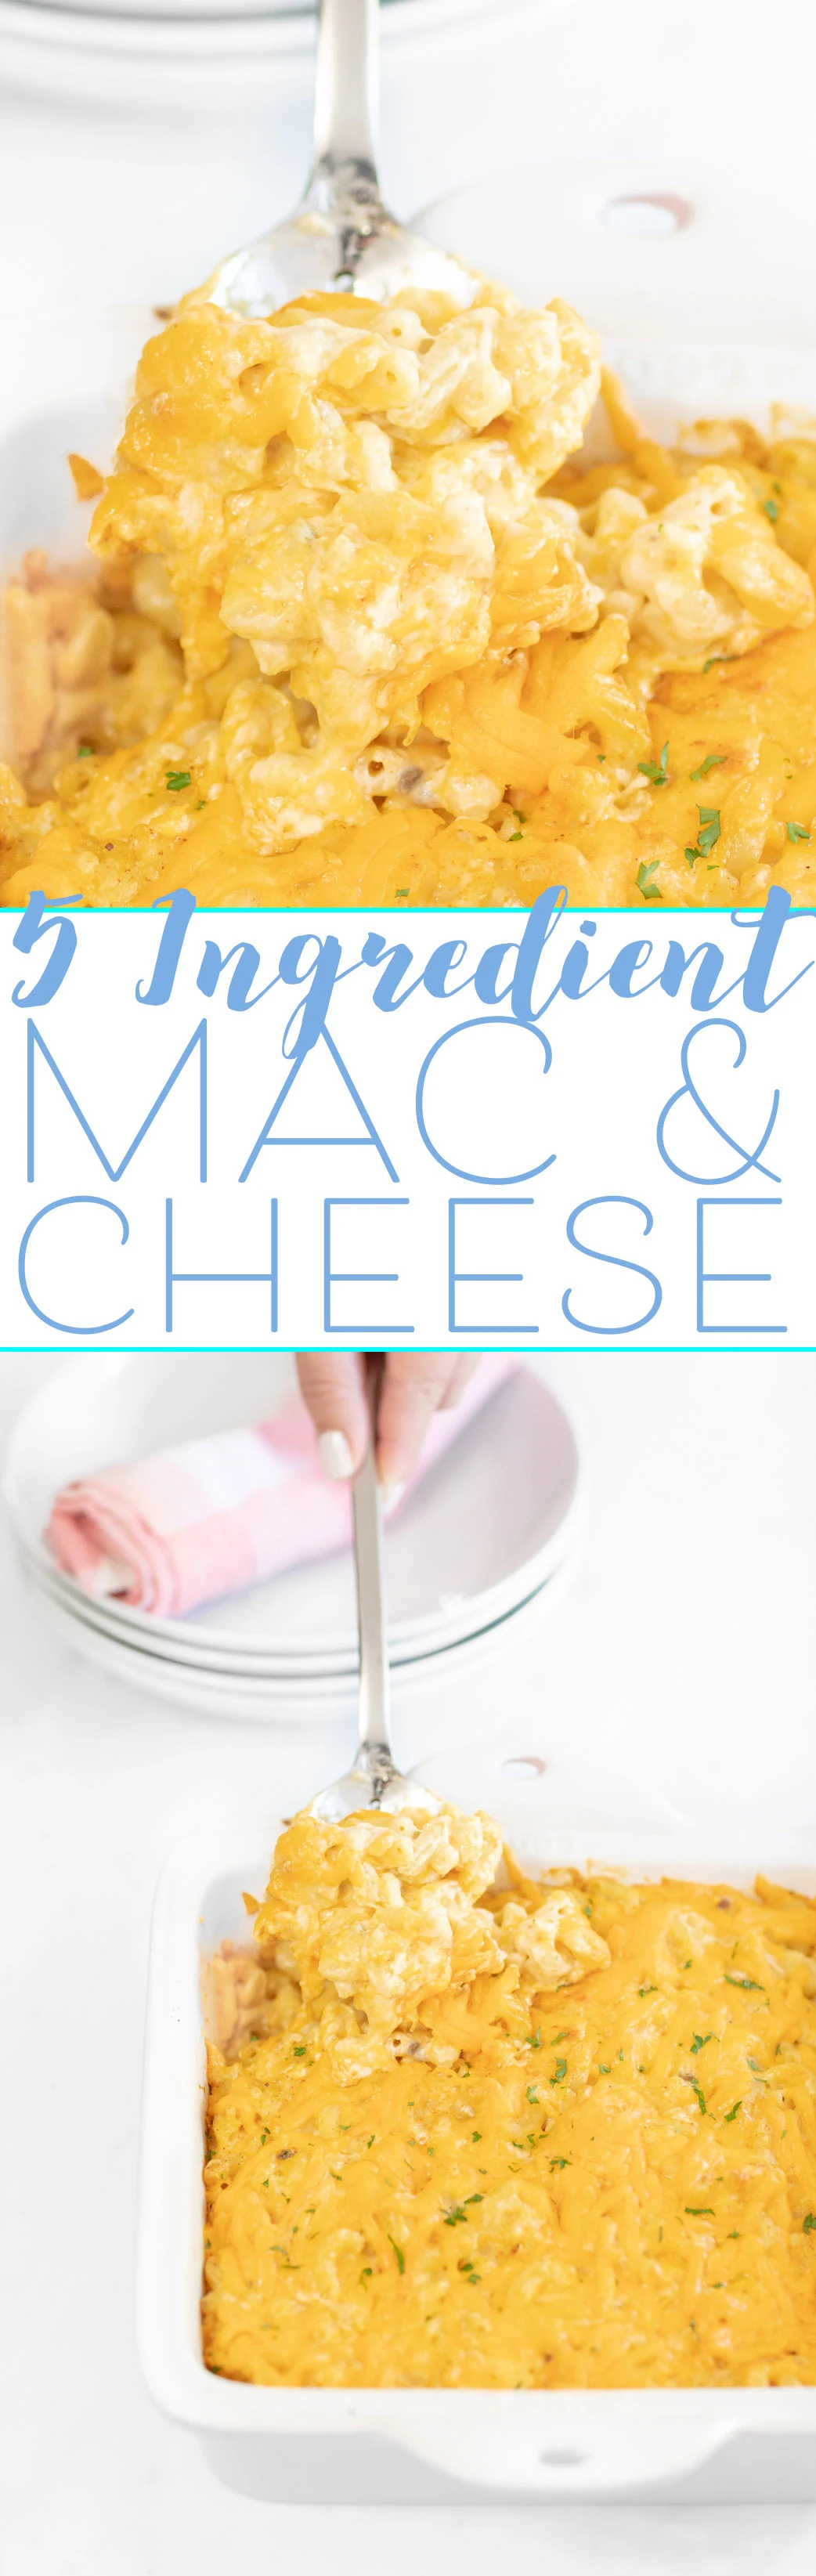 Mac and Cheese with 5 Ingredients